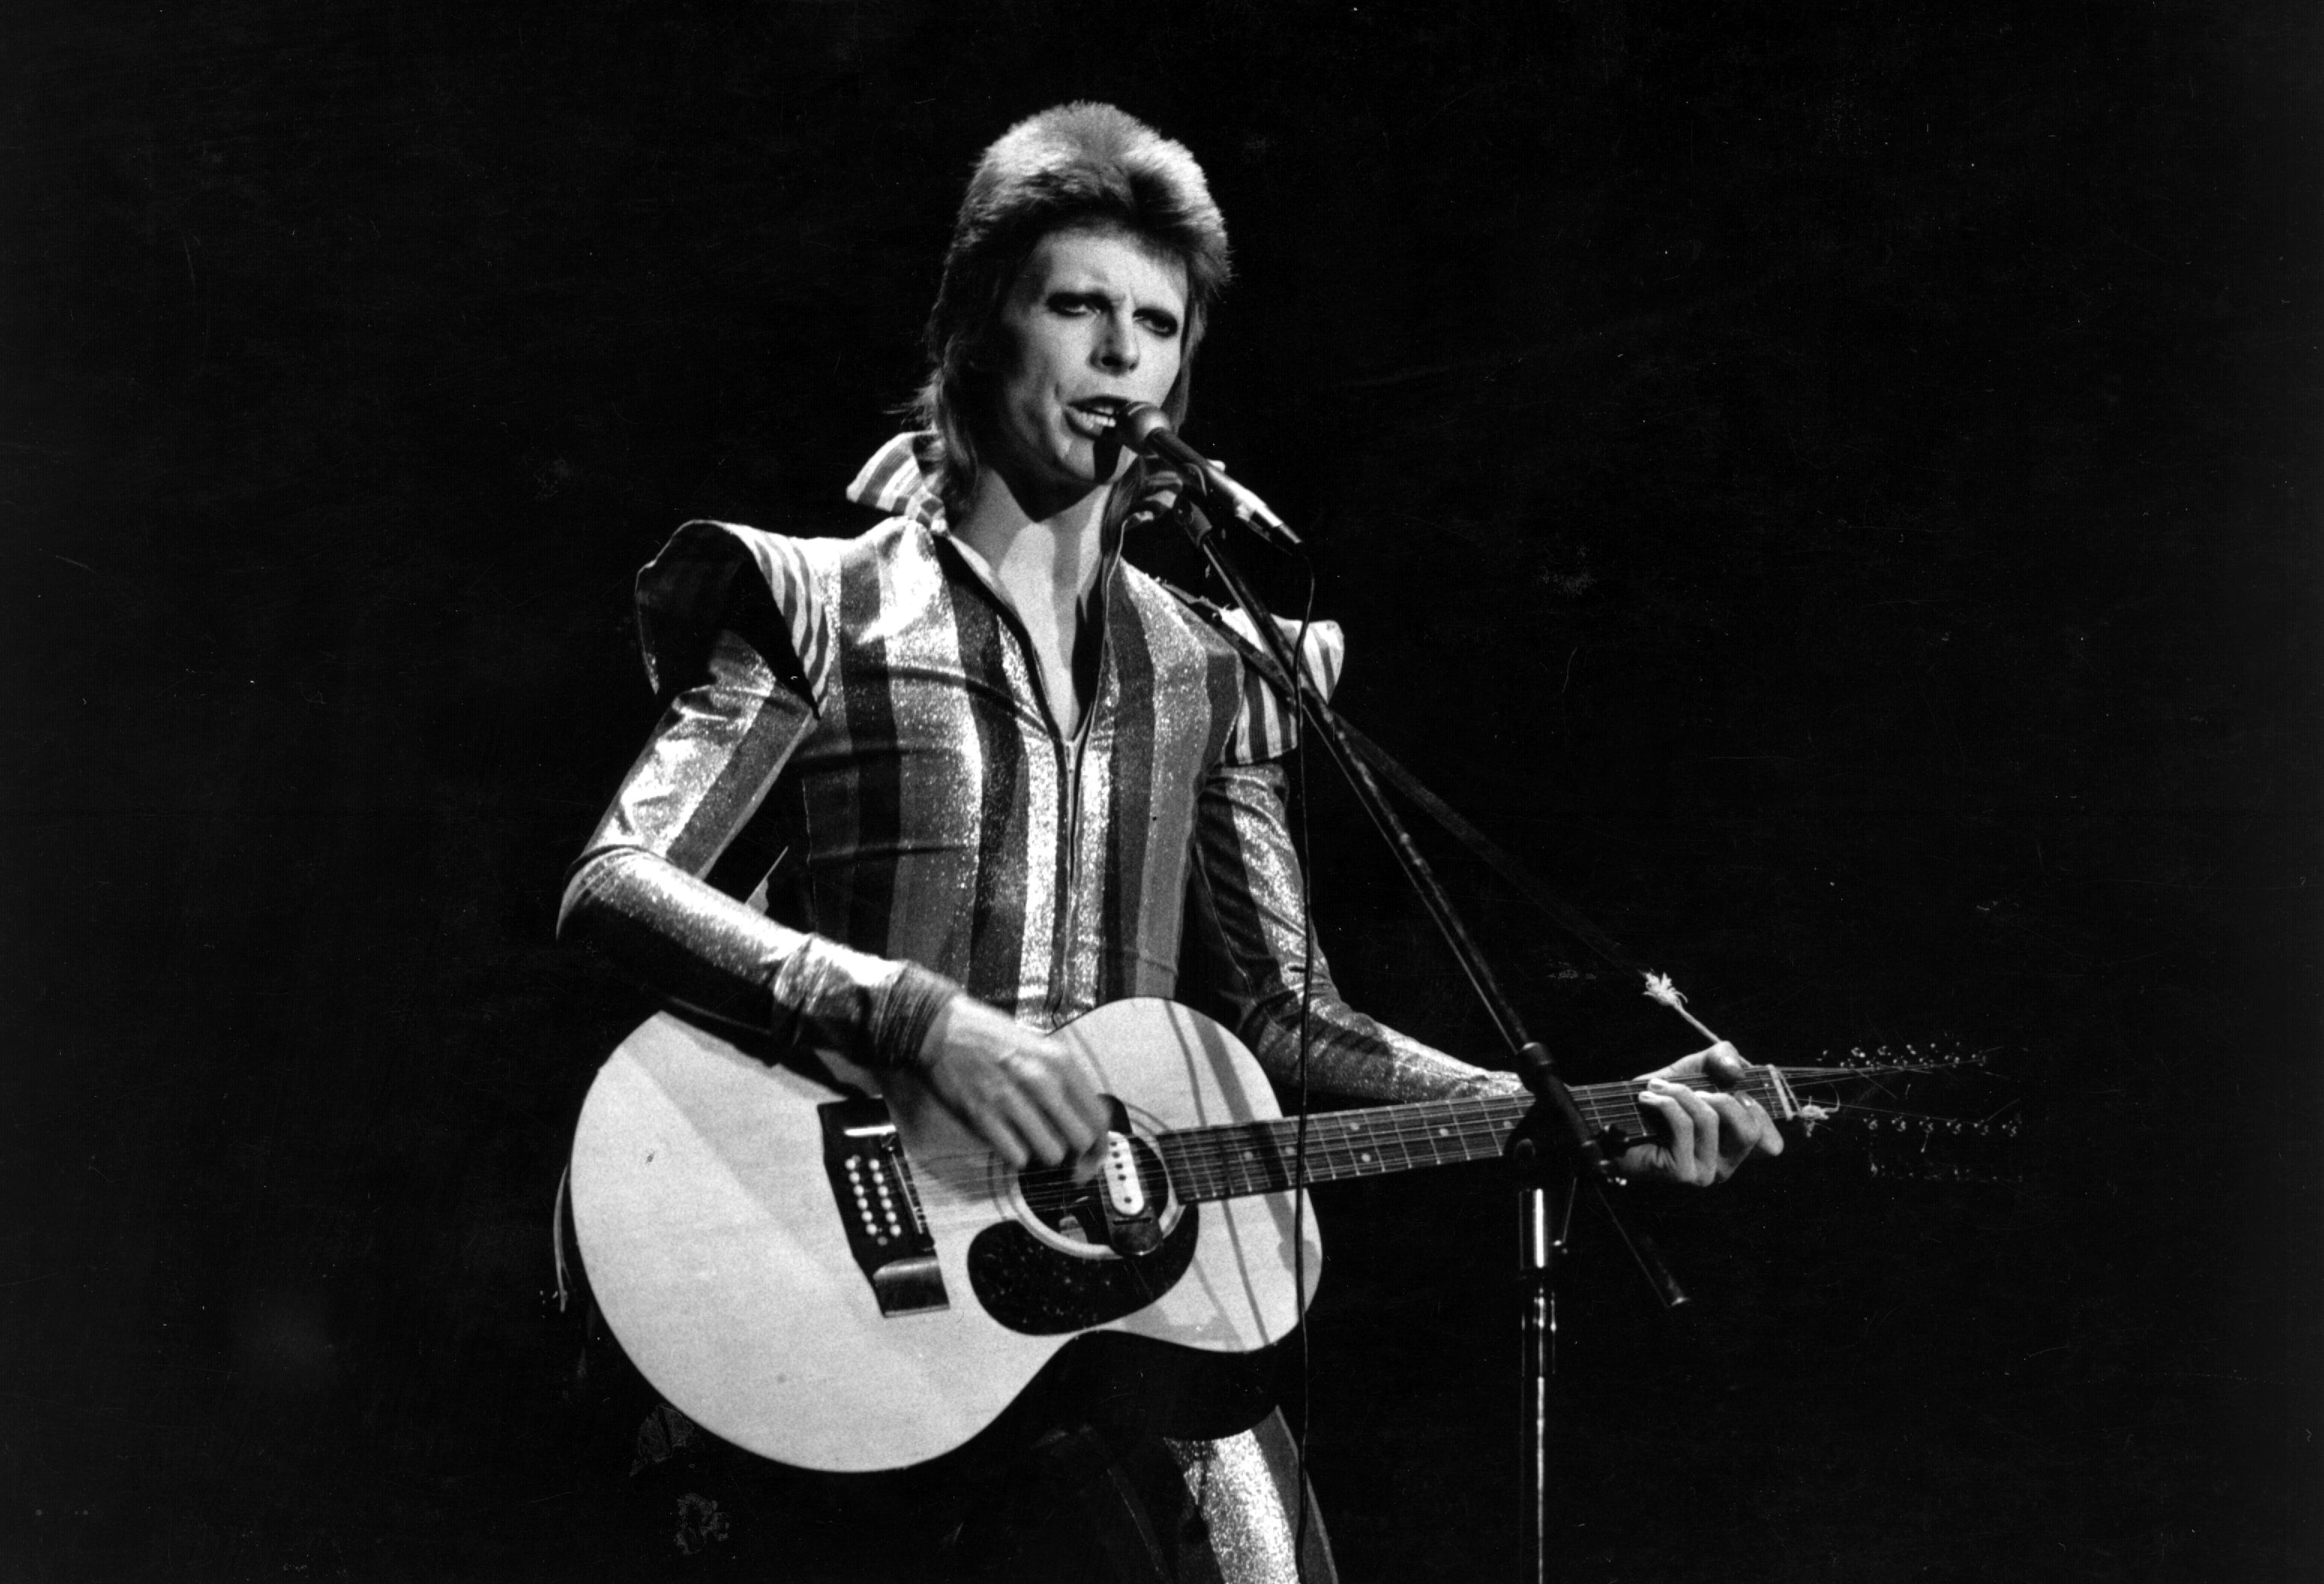 Ziggy Stardust remains an original, in music and finance.